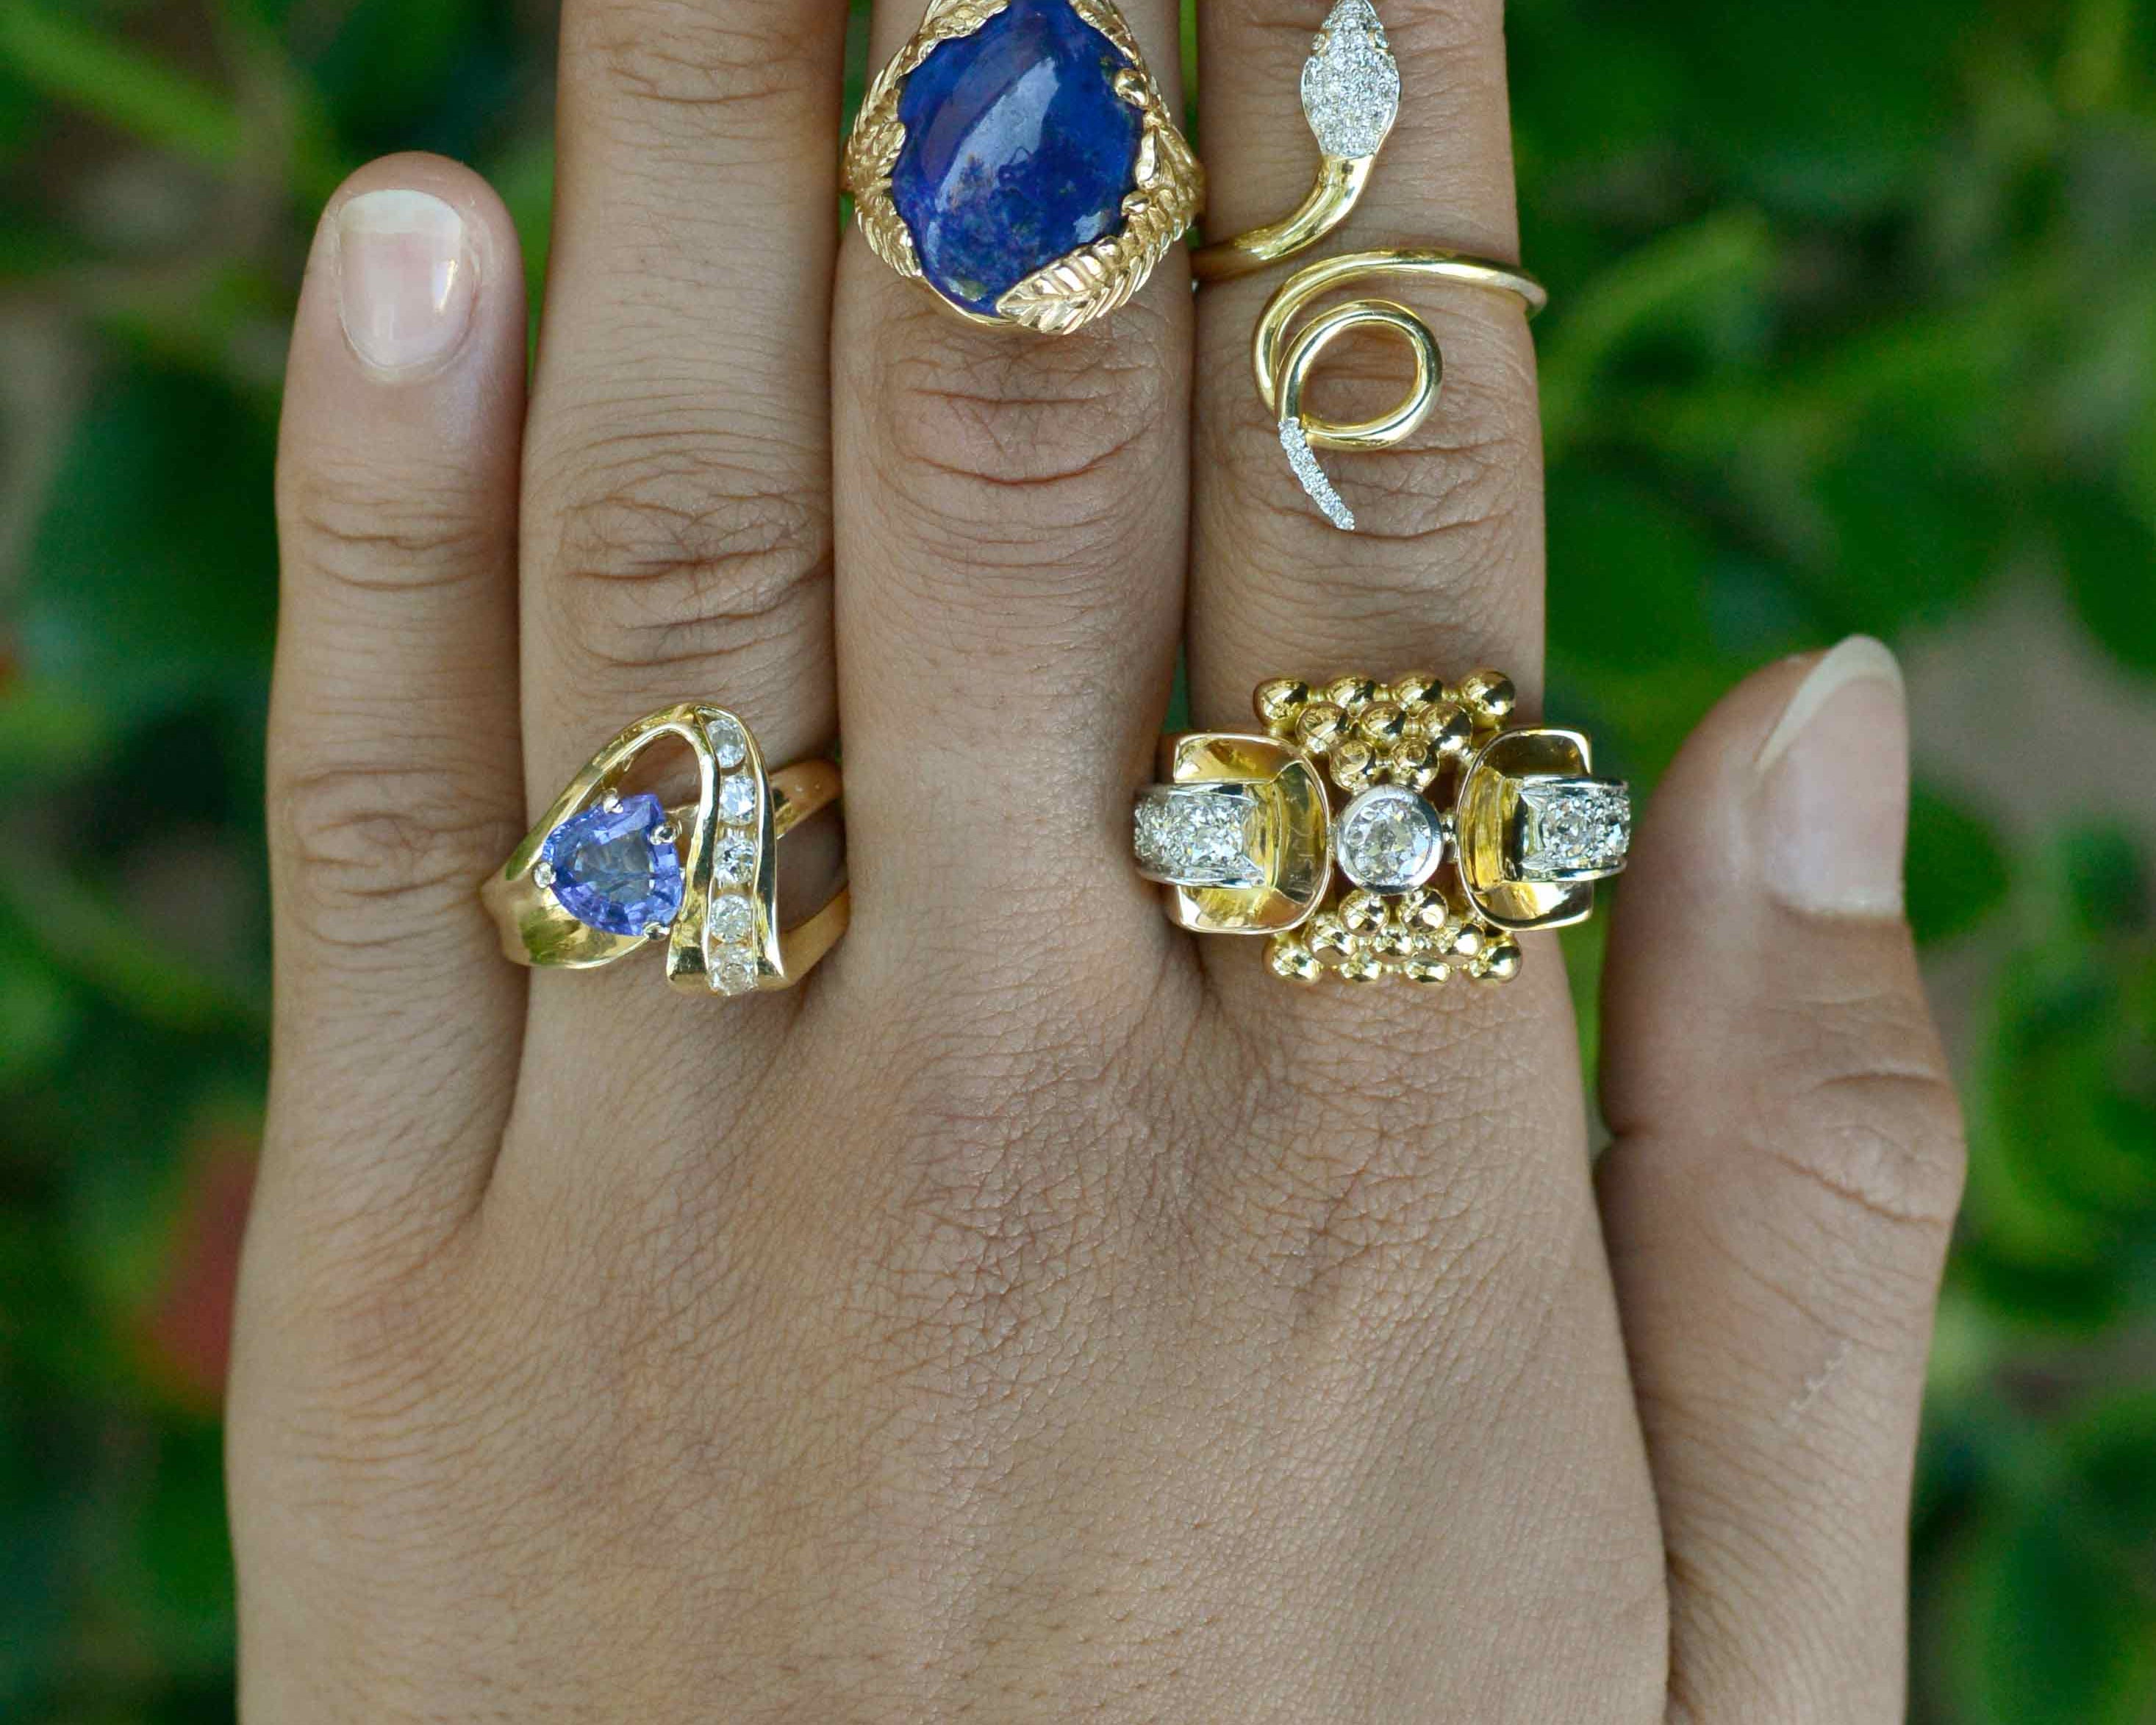 Modern gold cocktail rings set with diamonds and blue gemstones.